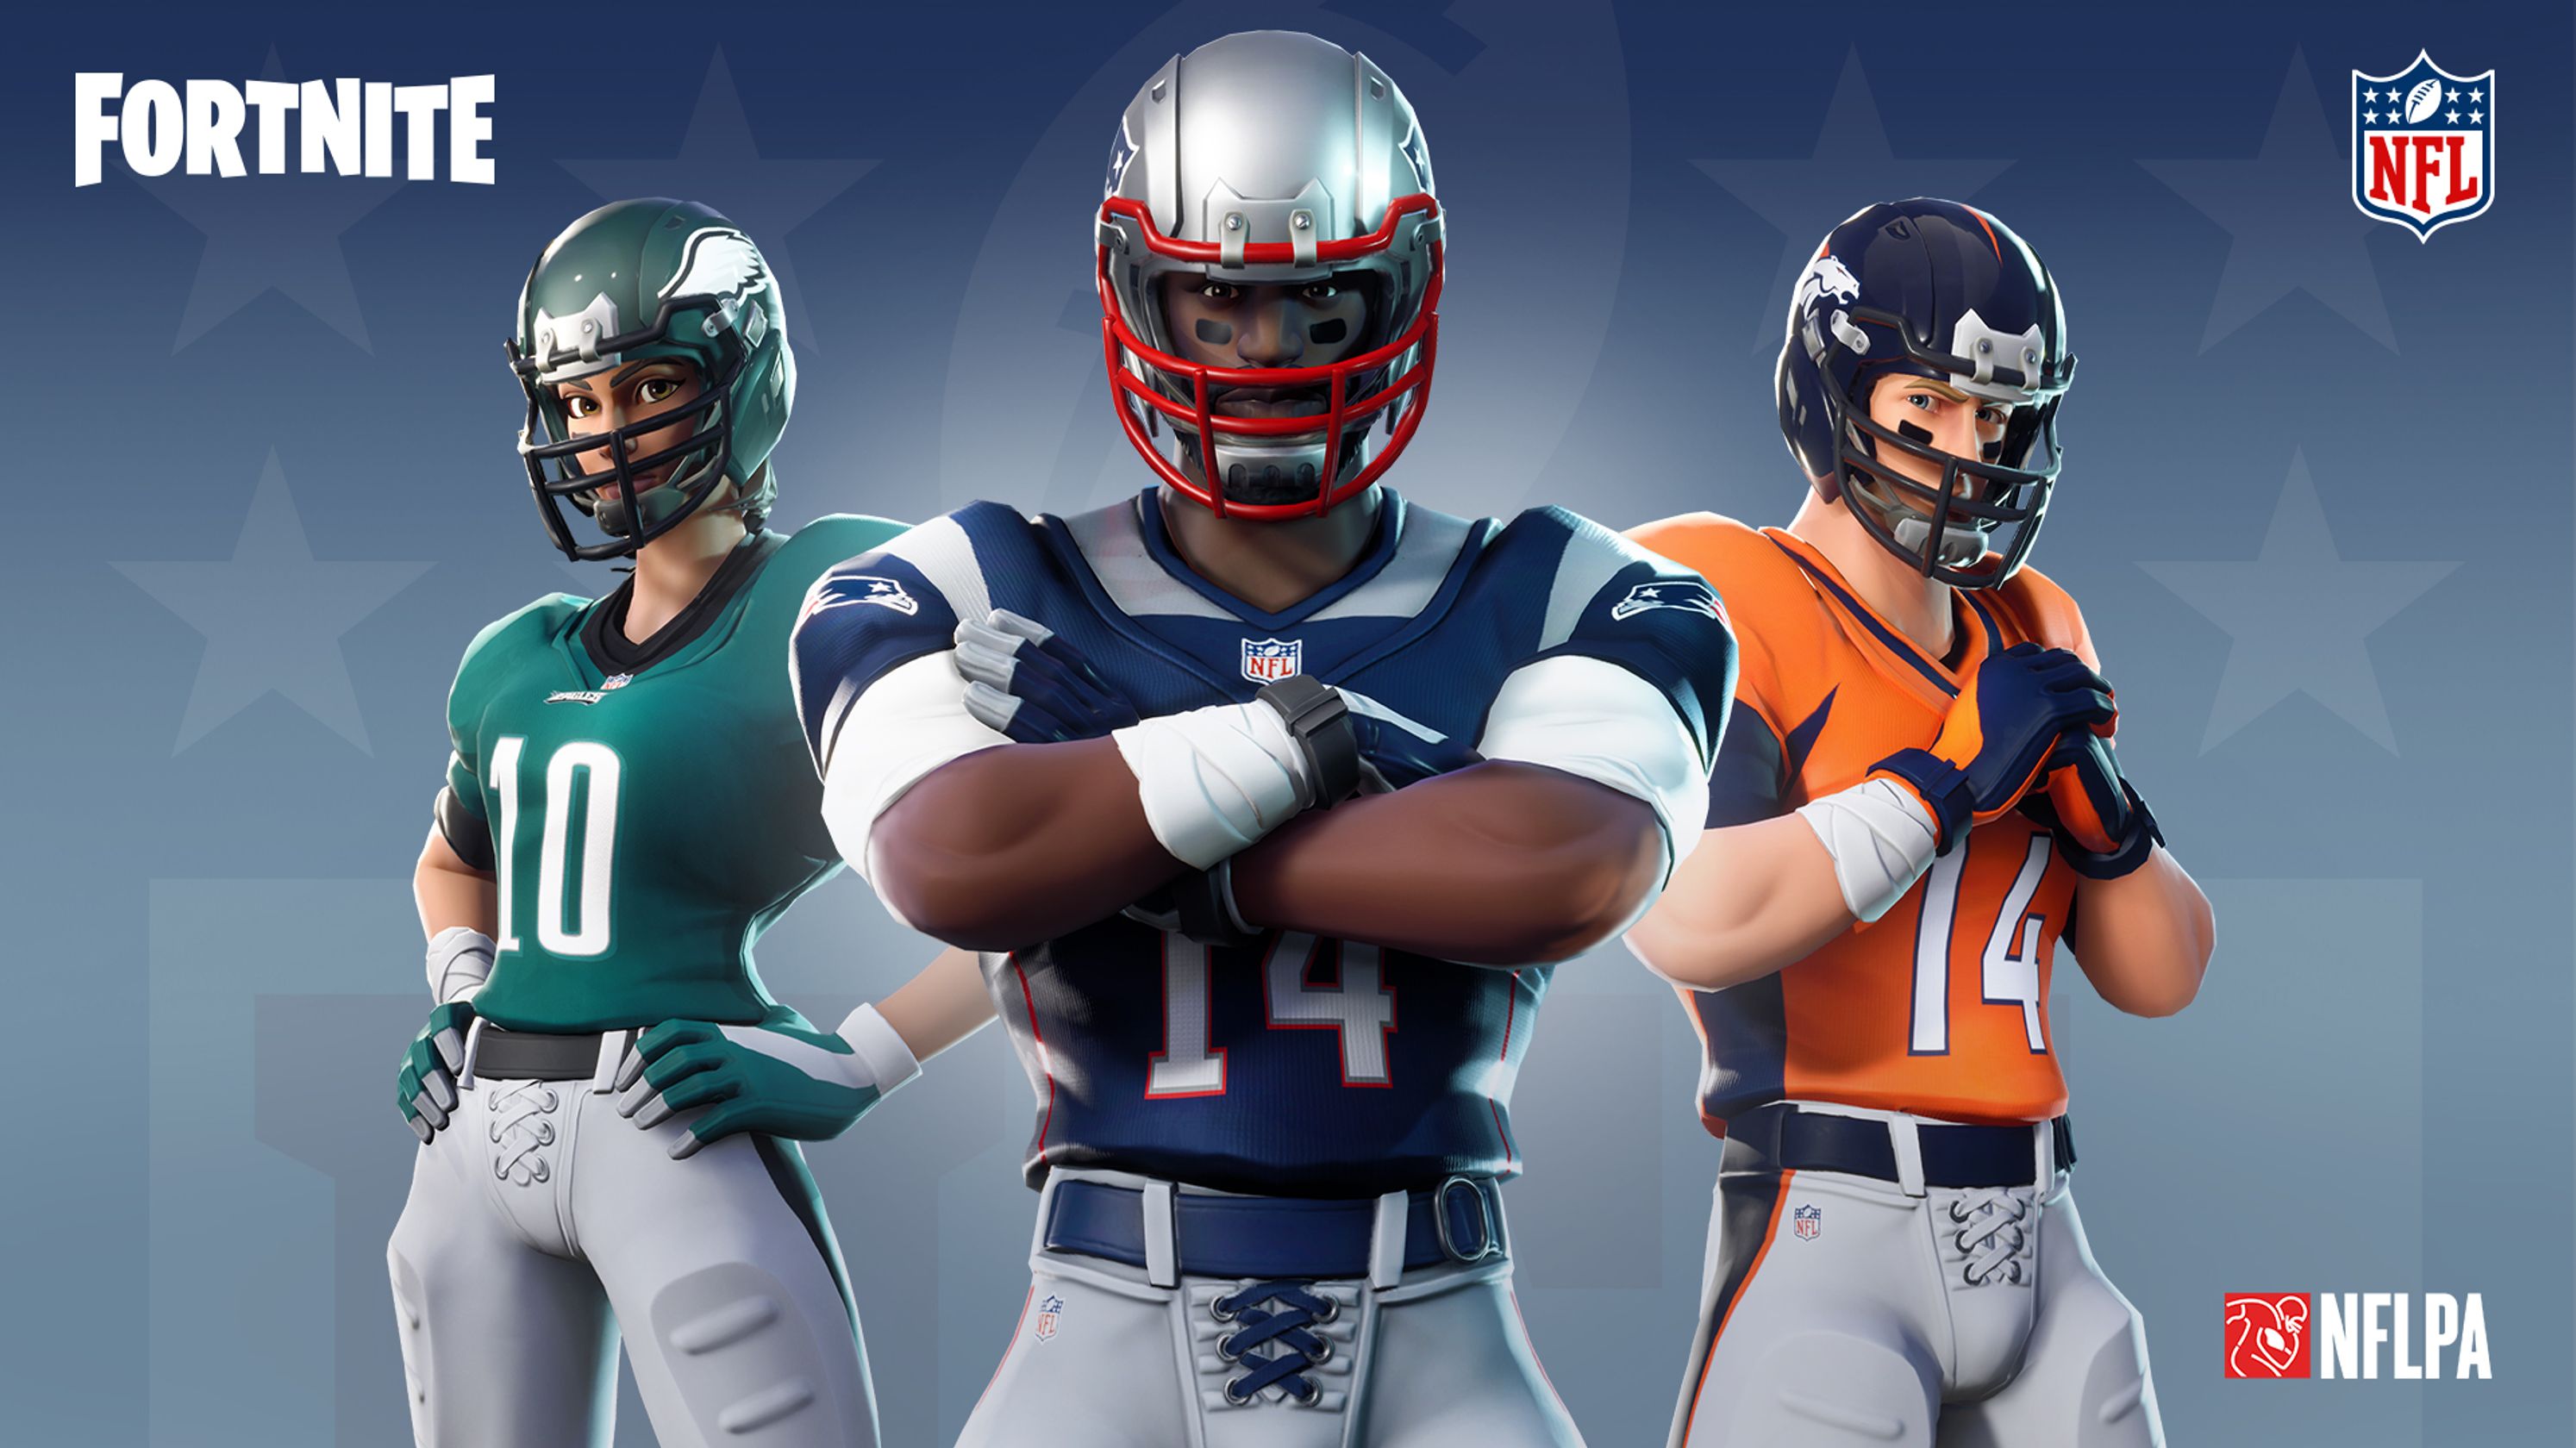 Fortnite Adds Nfl Uniforms And Other Football Gear